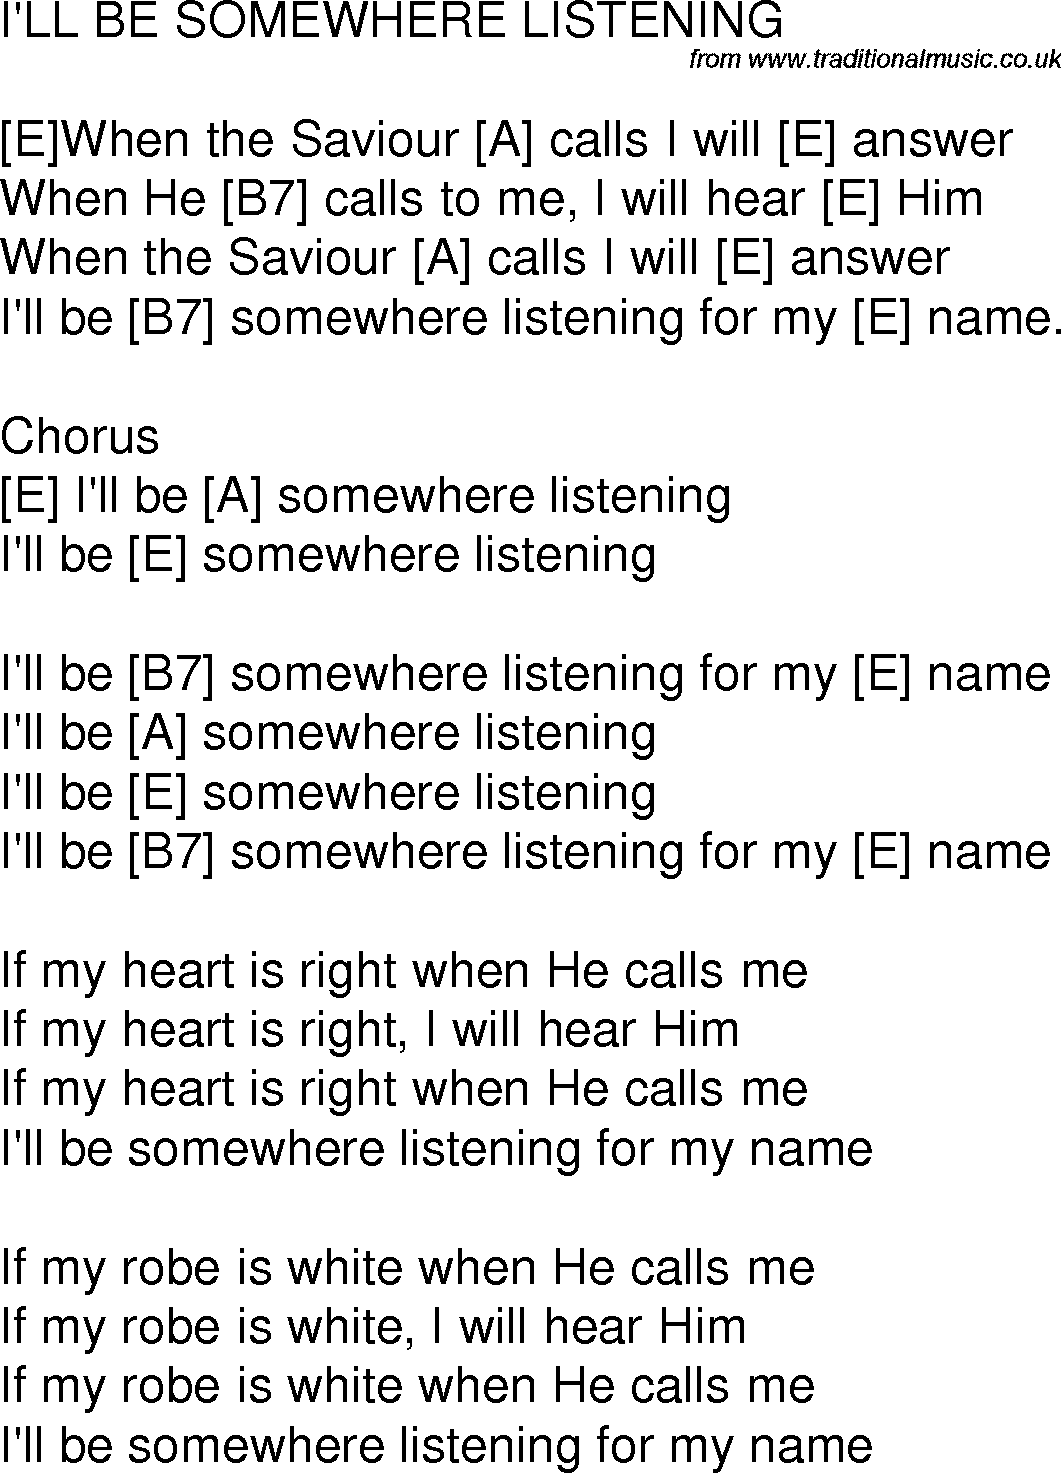 Old time song lyrics with chords for I'll Be Somewhere Listening E